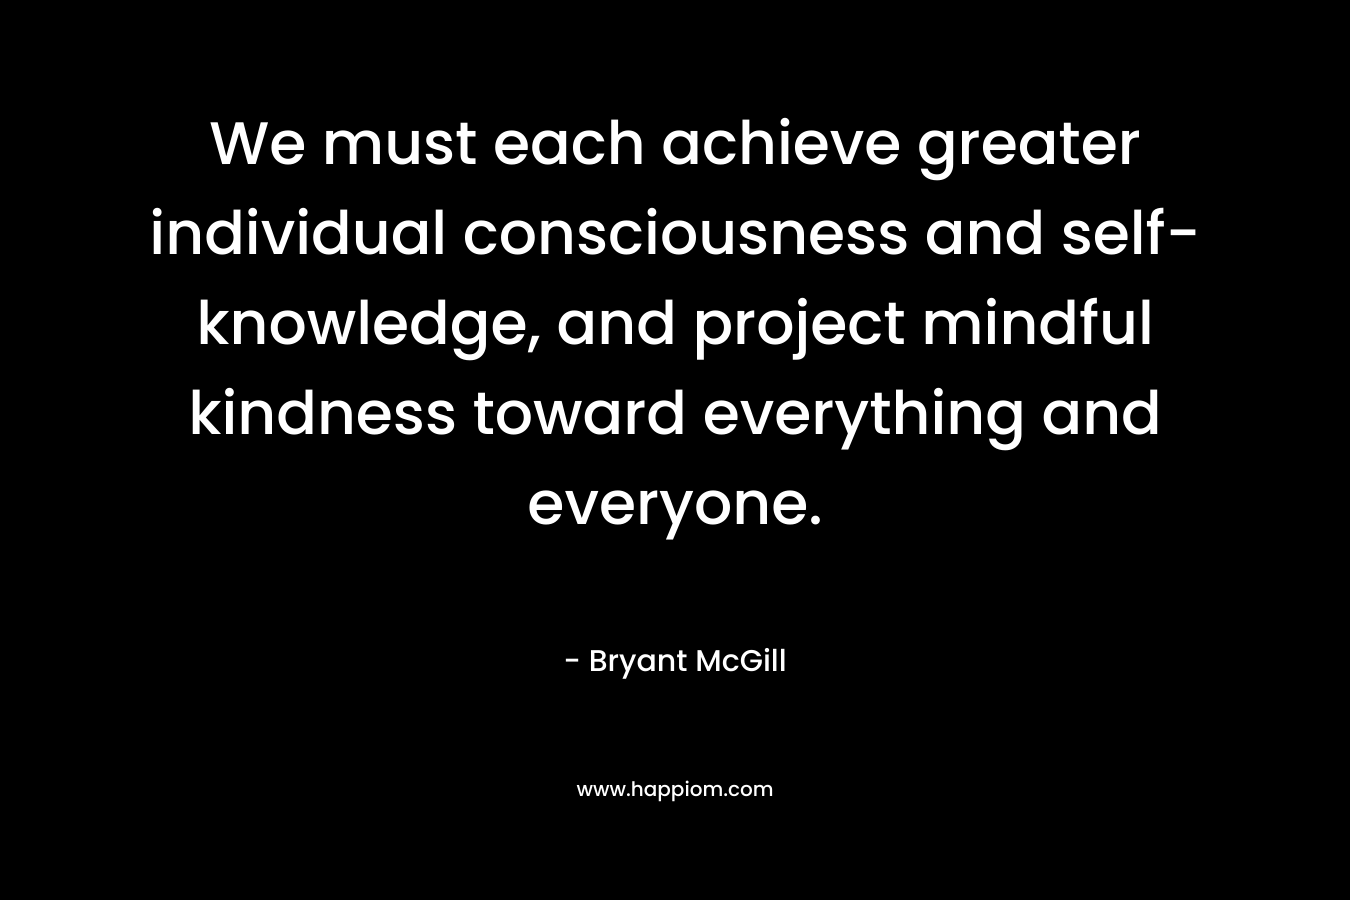 We must each achieve greater individual consciousness and self-knowledge, and project mindful kindness toward everything and everyone.